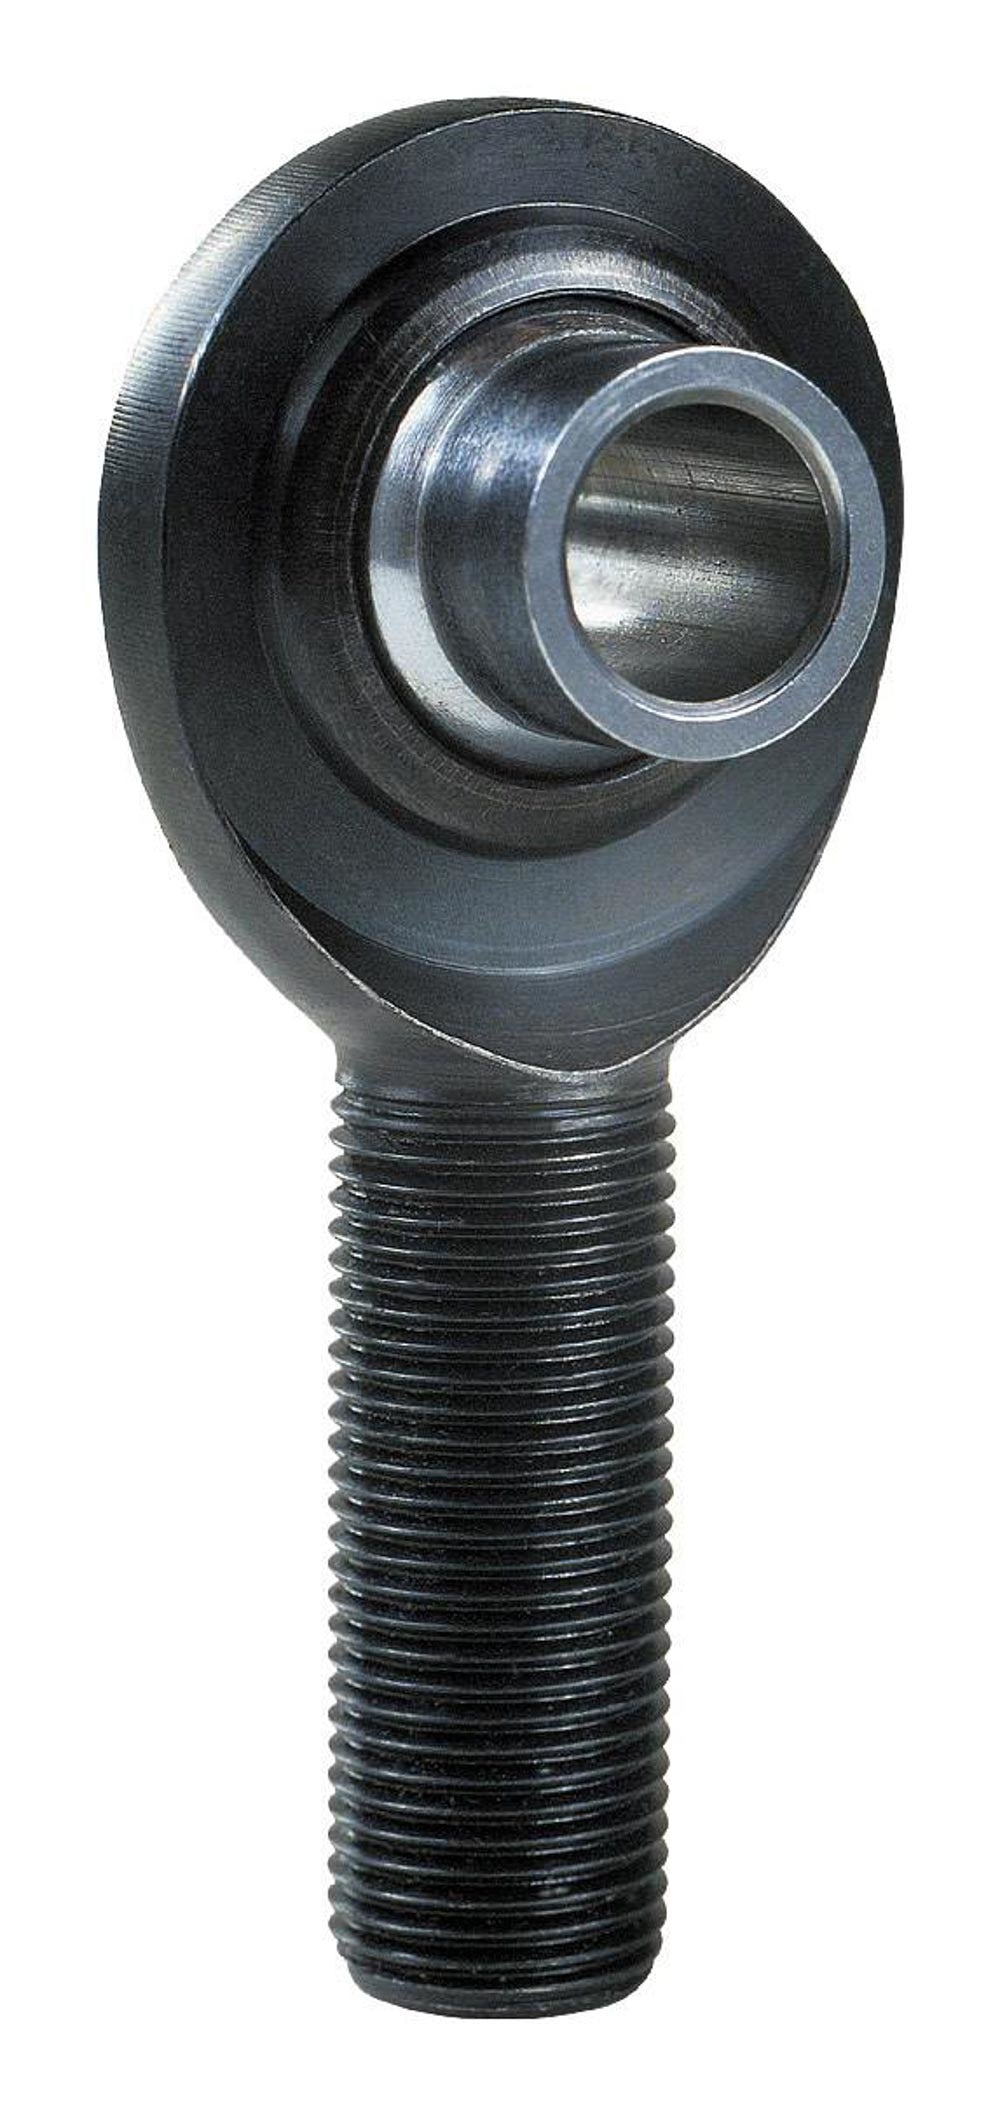 Rod End- 5/8in x 3/4in RH High Mis-Alignment